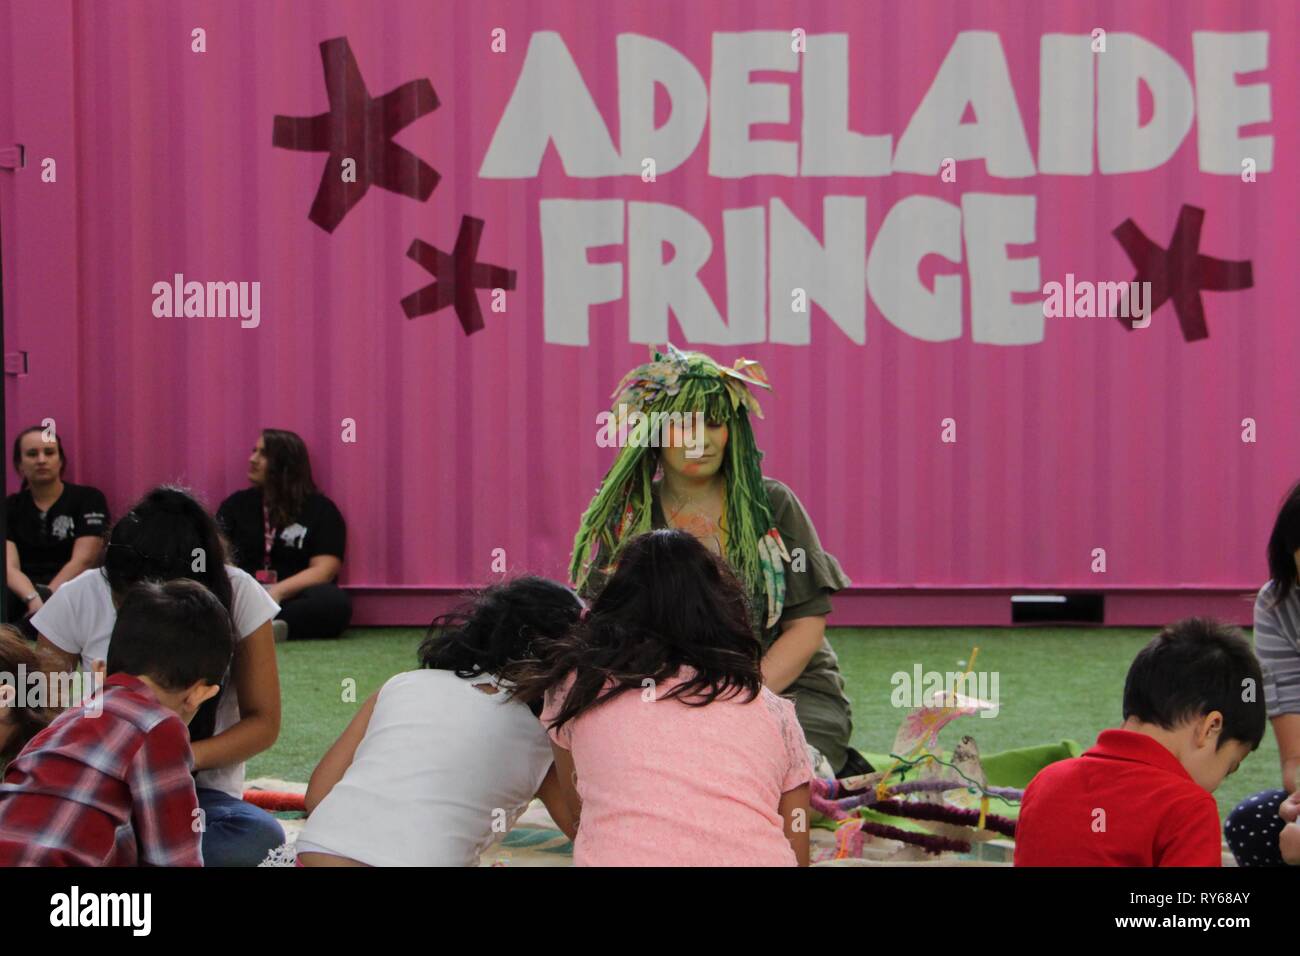 (190312) -- ADELAIDE, March 12, 2019 (Xinhua) -- An artist painting her face green teaches children to make art works during the Adelaide Fringe Festival in Adelaide, Australia, March 11, 2019. The Adelaide Fringe, an annual arts festival founded nearly 70 years ago, lasts from Feb. 15 to March 17 this year. (Xinhua/Lyu Wei) Stock Photo